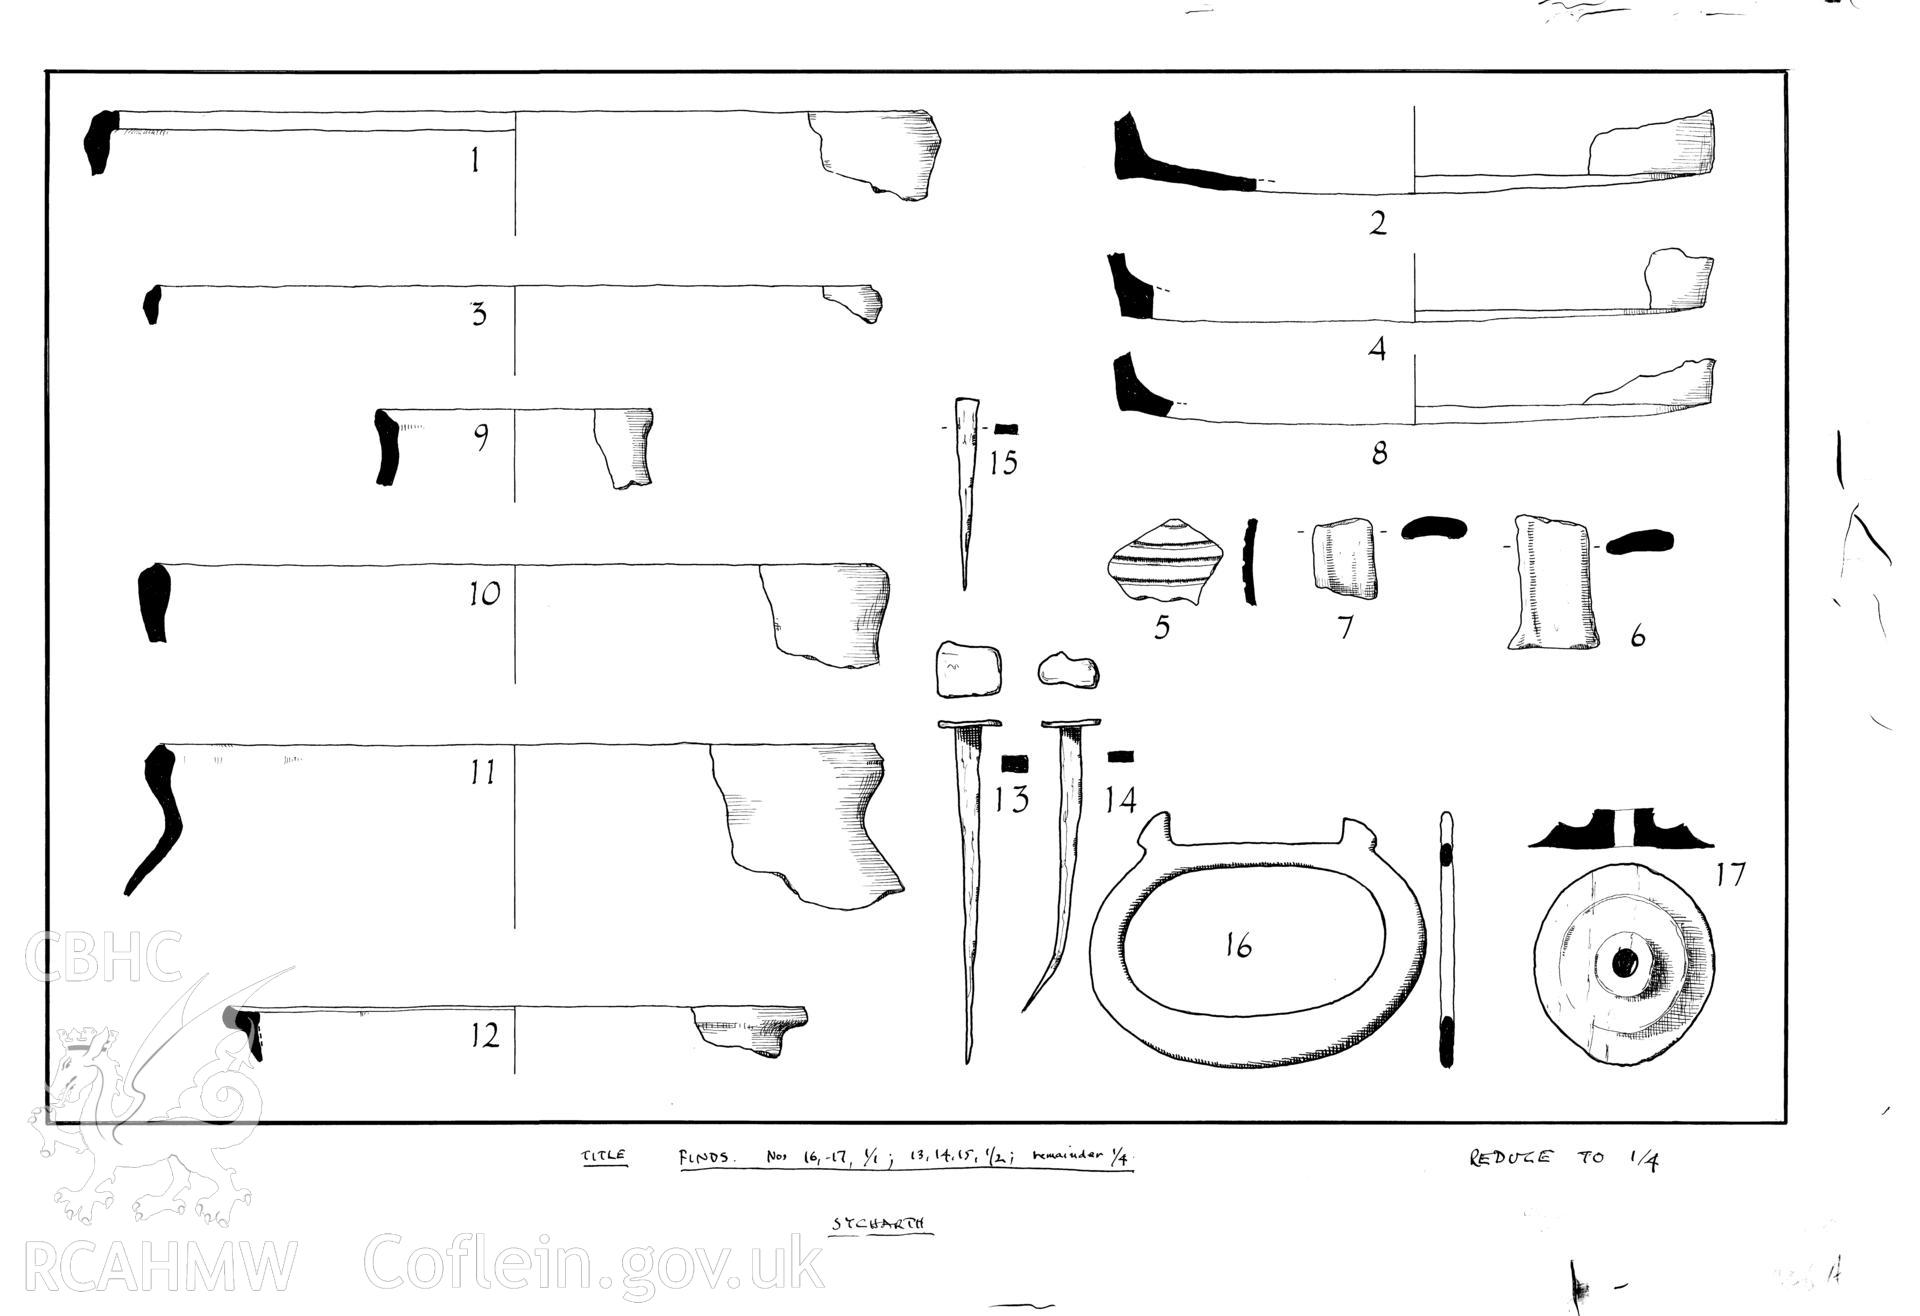 Sycharth Castle, Llansilin; ink drawing by Douglas Hague showing finds discovered during excavations of 1962-63 and published in Archaeologia Cambrensis Vol CXV, 1966, fig 6.